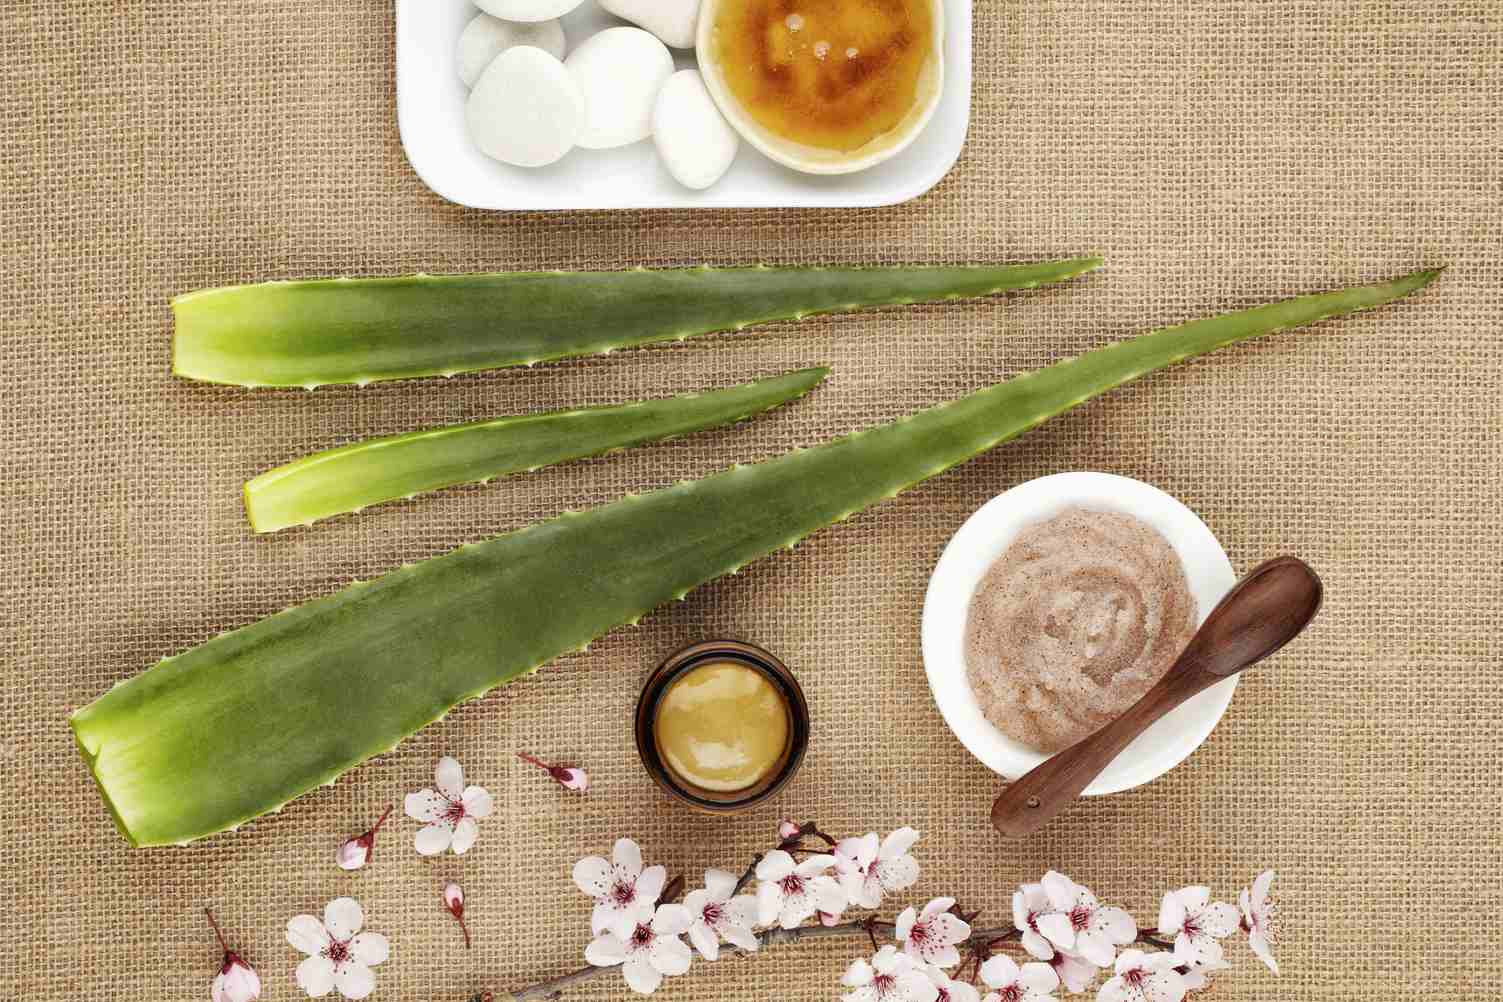 home remedies for recurring acne